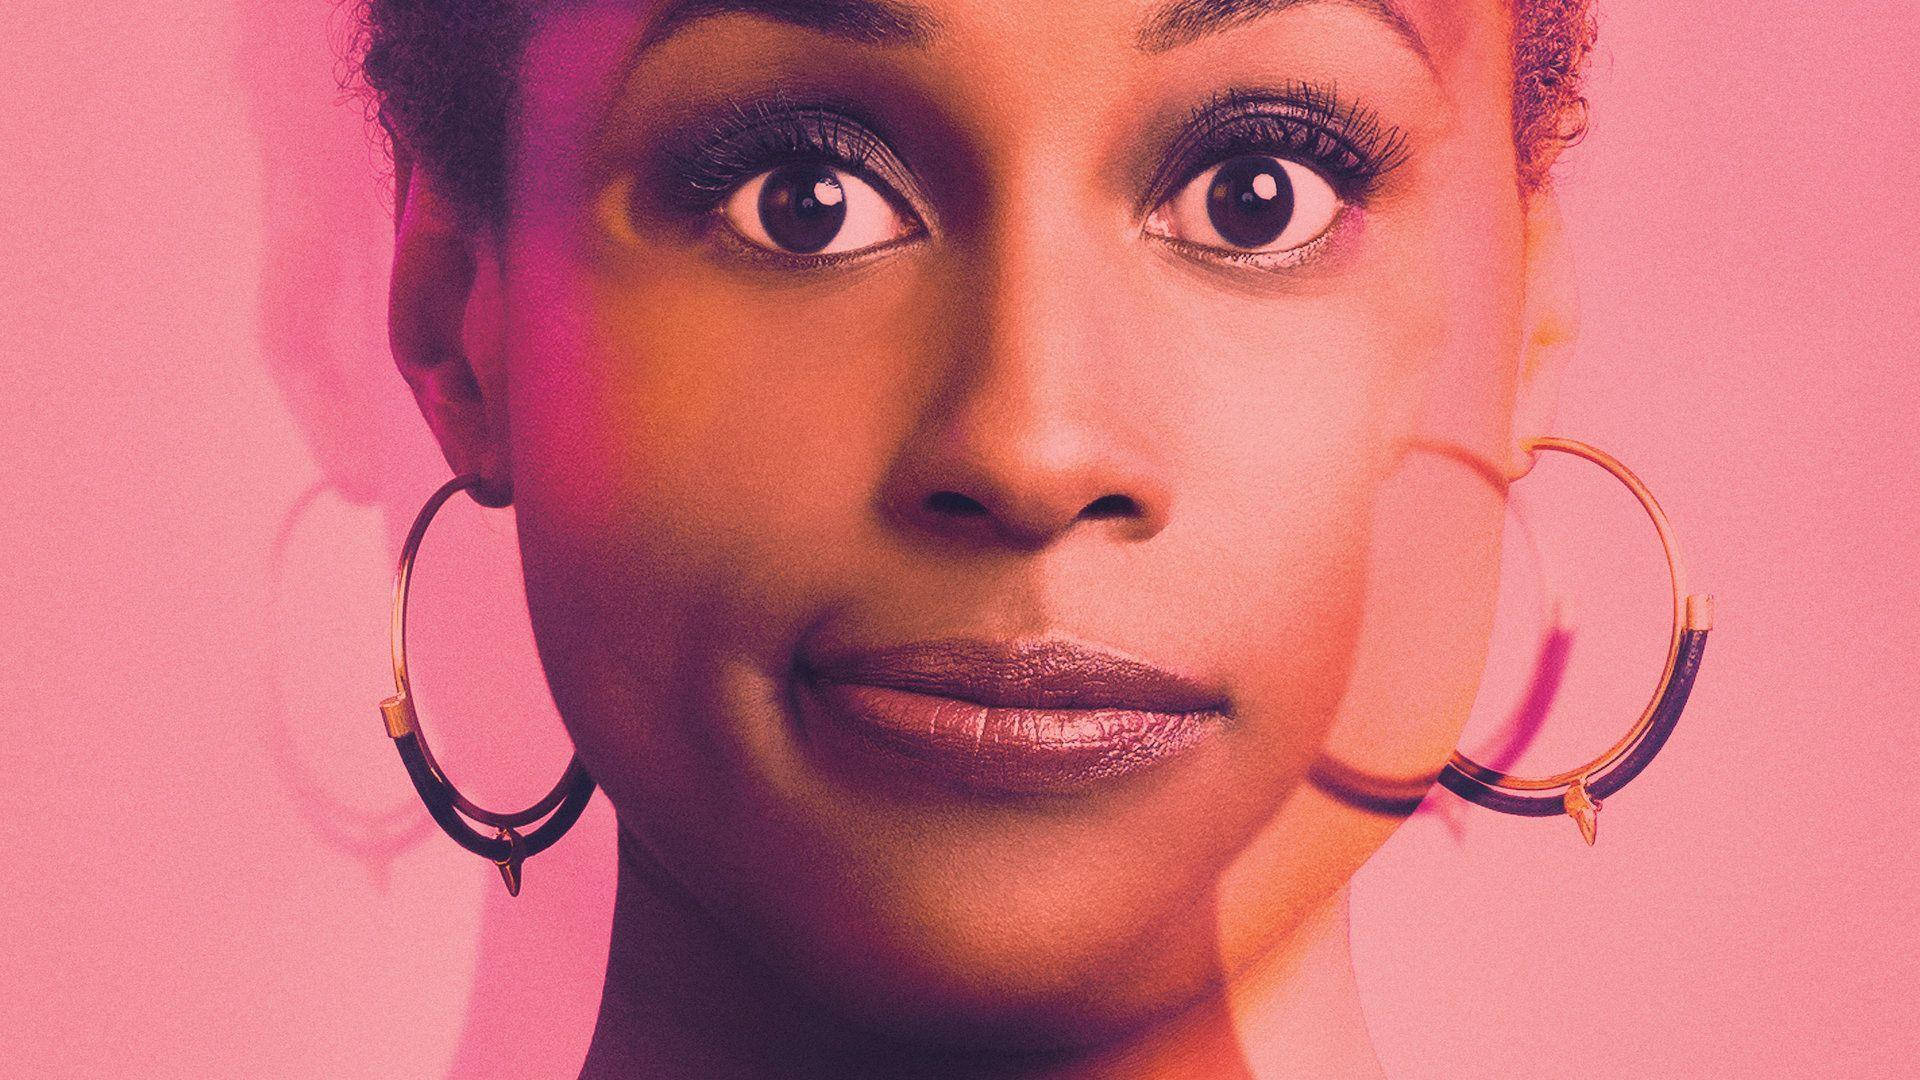 Insecure Creator Issa Rae Pink Aesthetic Wallpaper